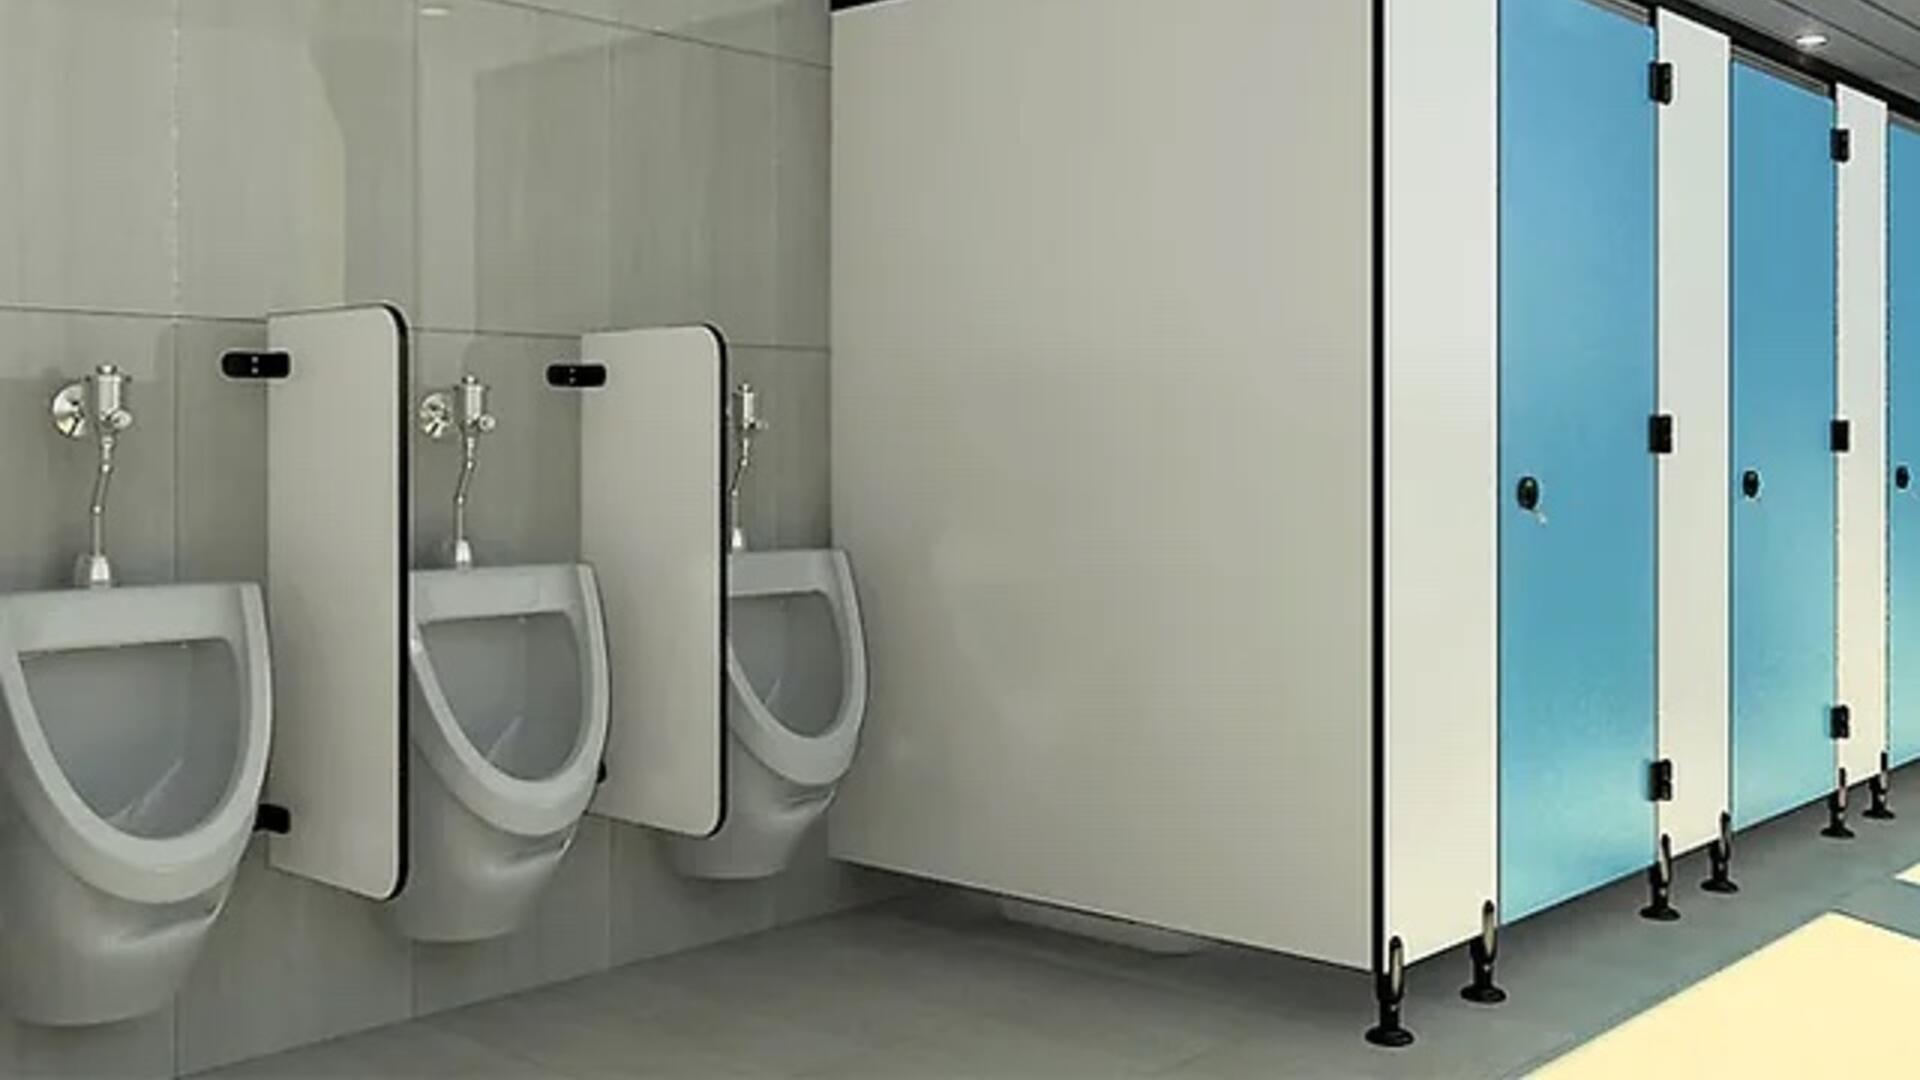 Three urinals and three stalls in a bathroom